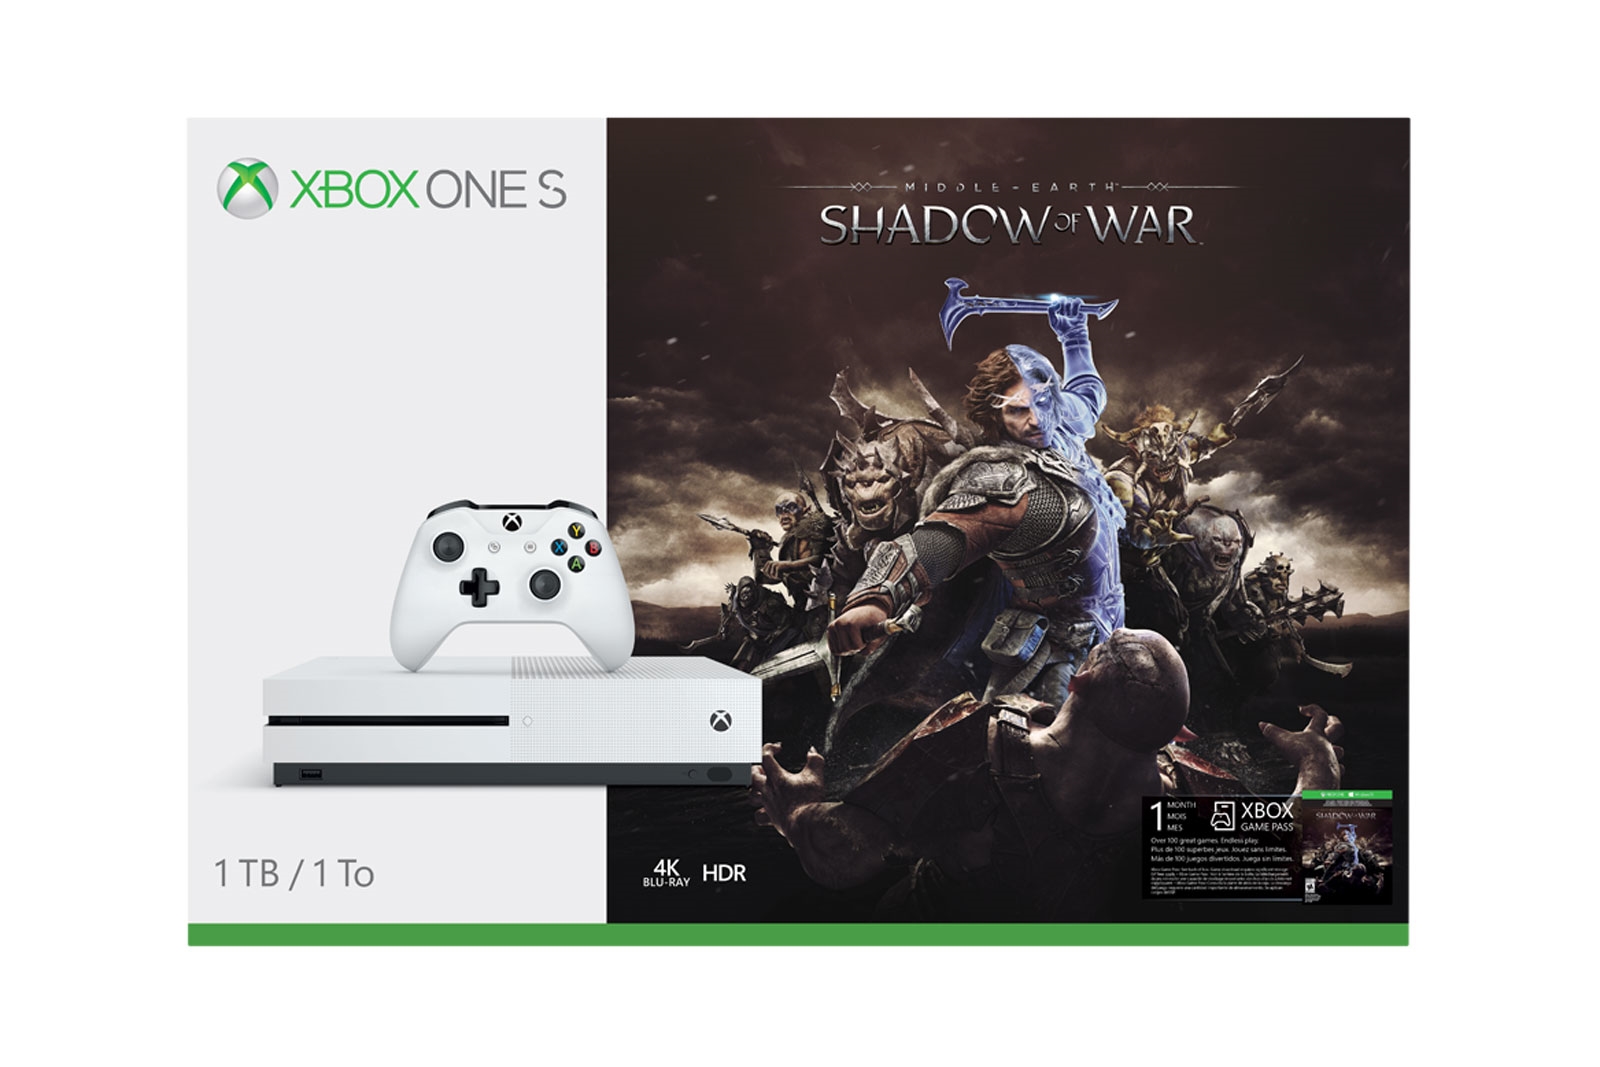 Pre-order Xbox One X in a limited Project Scorpio Edition | DeviceDaily.com